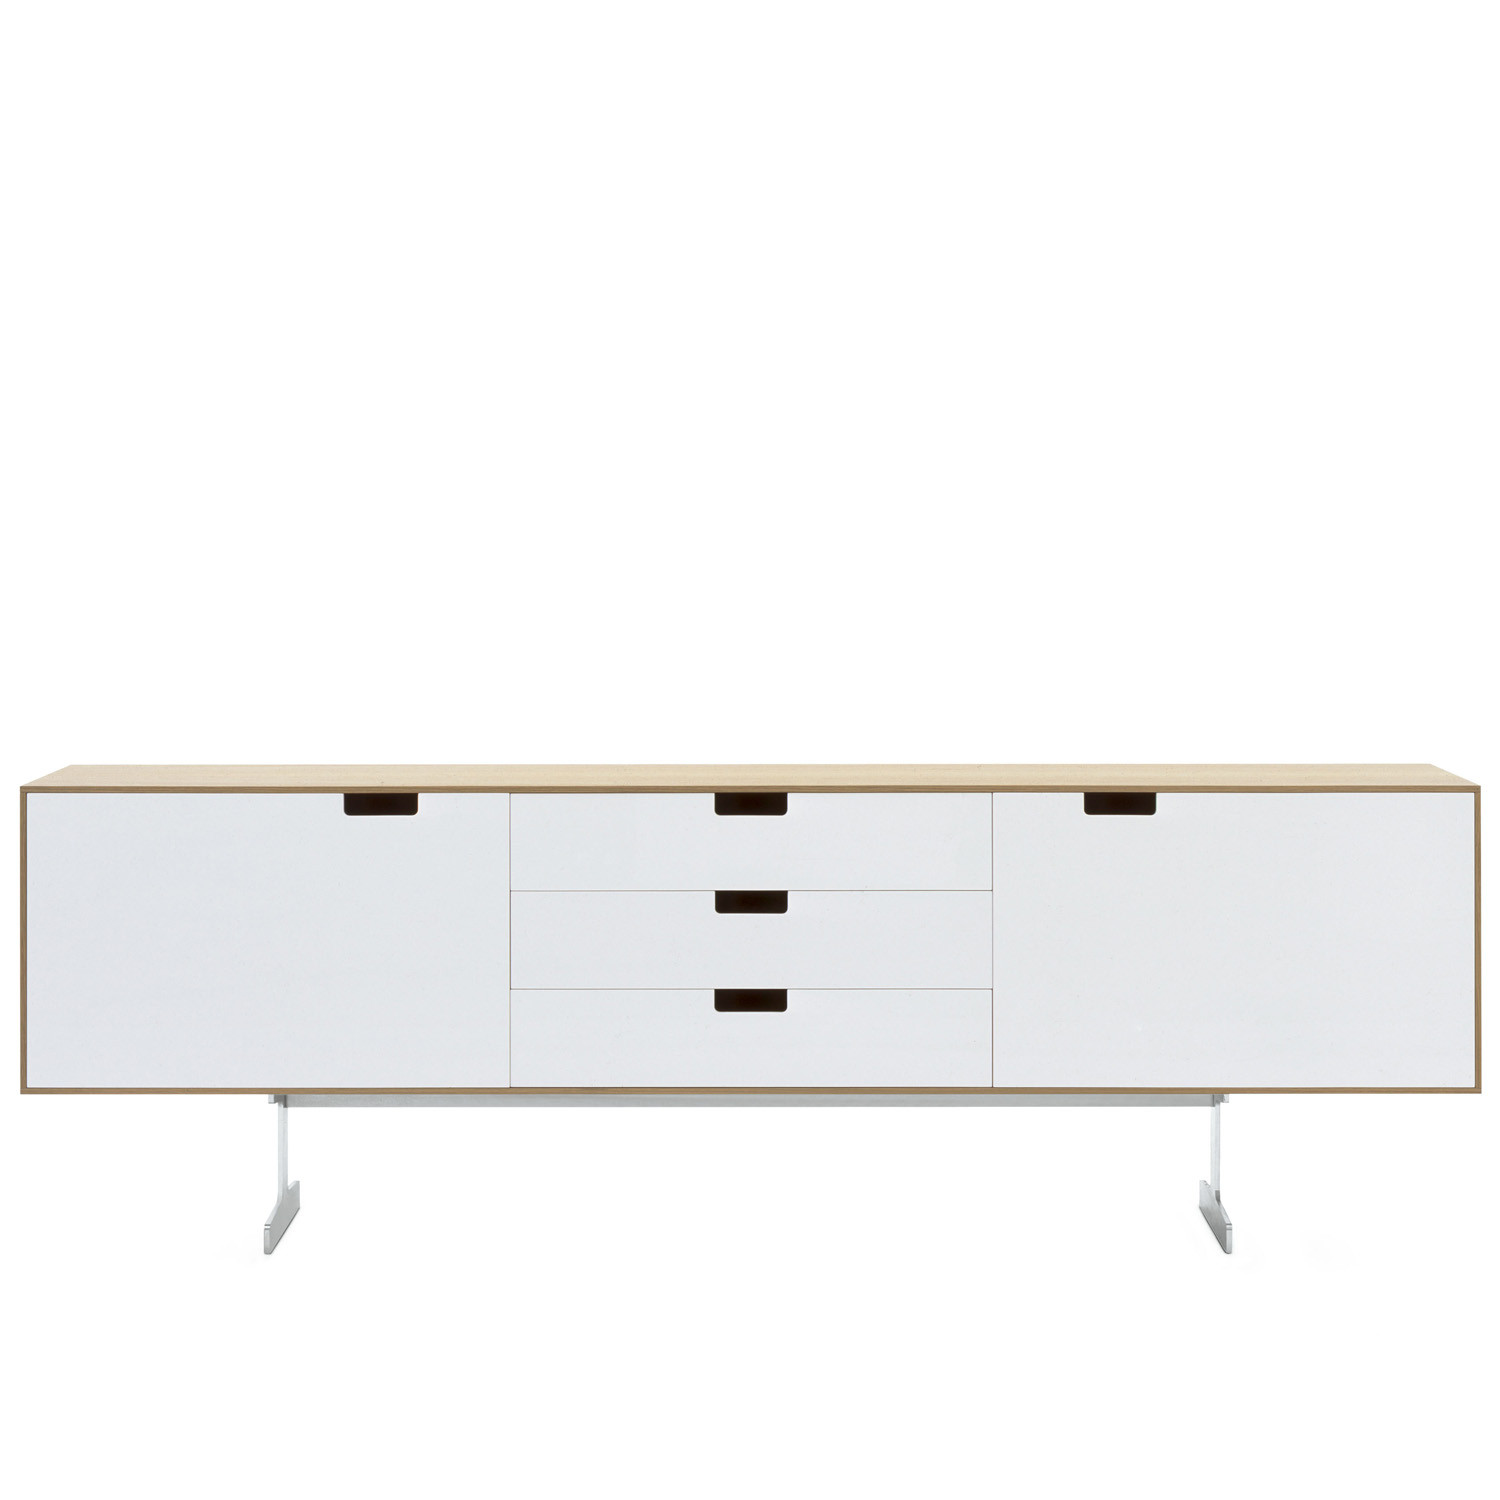 Simplon Cabinets by Cappellini